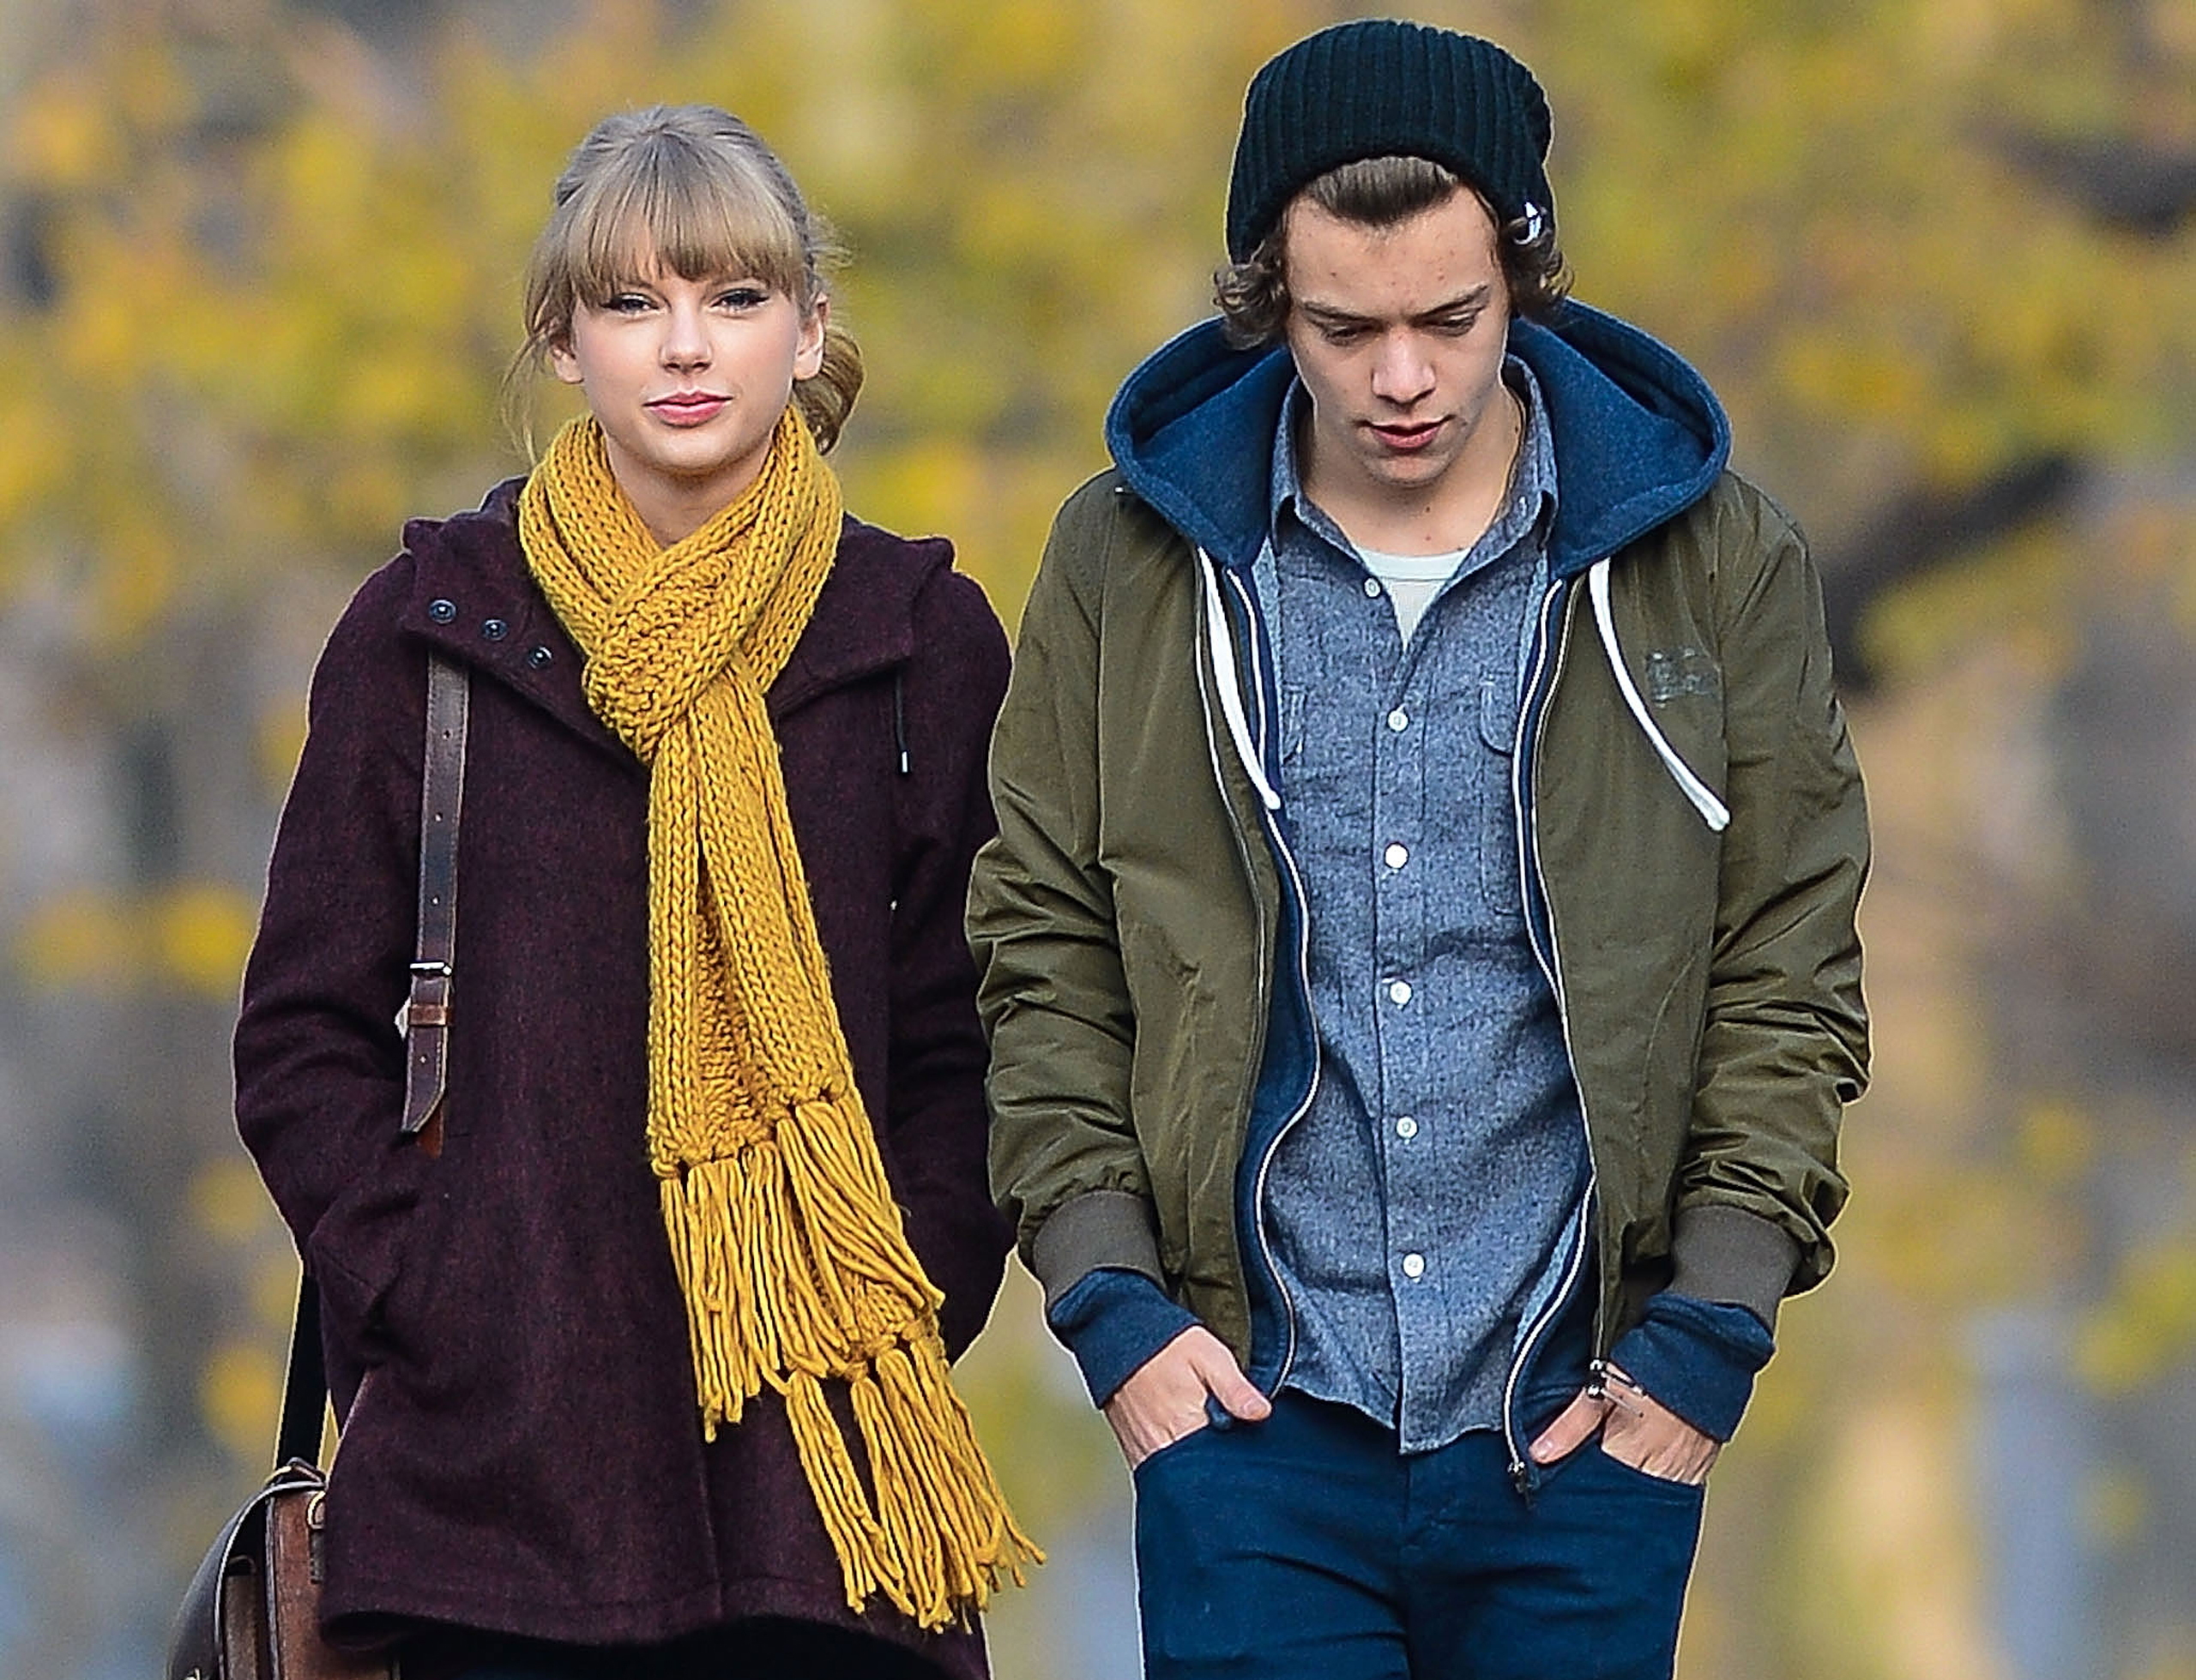 Taylor Swift and Harry Styles are seen walking around Central Park in New York on Dec.02, 2012. (David Krieger—Bauer-Griffin/GC Images)